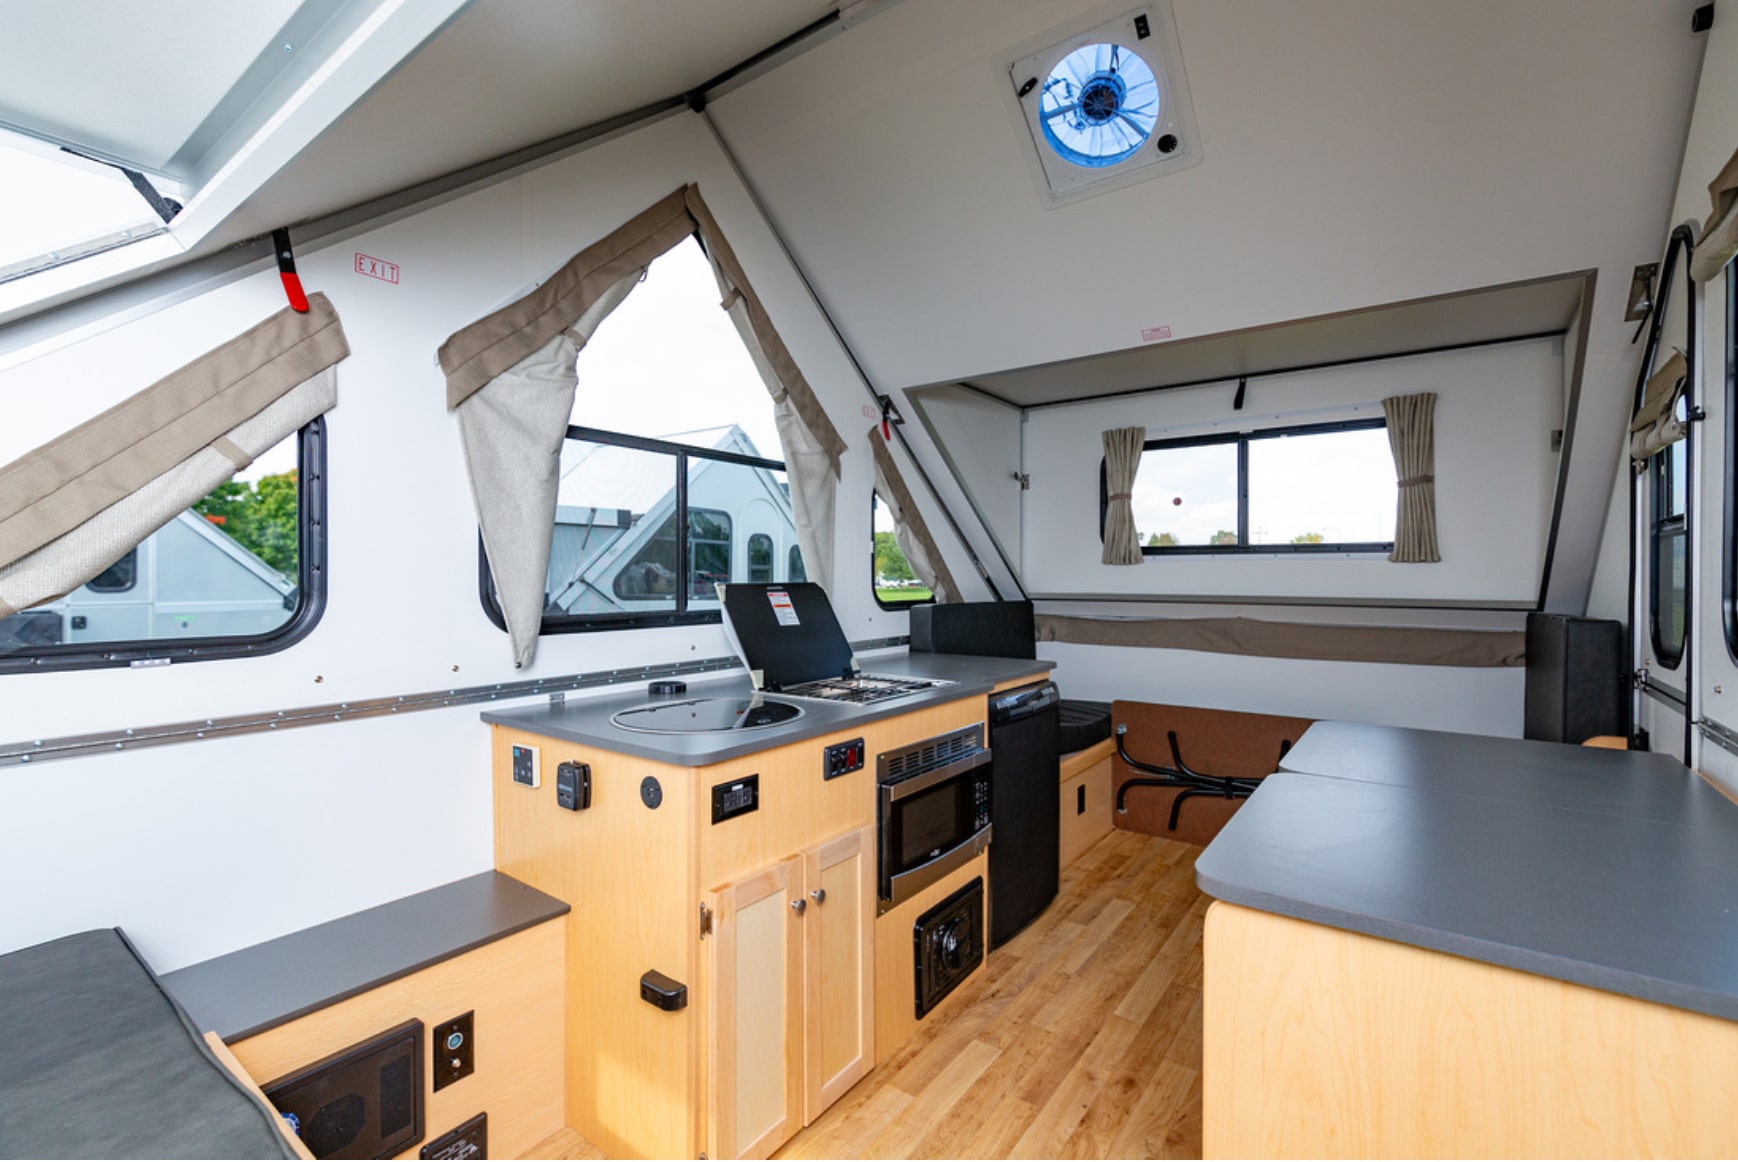 The interior of an rv with a kitchen and living area.